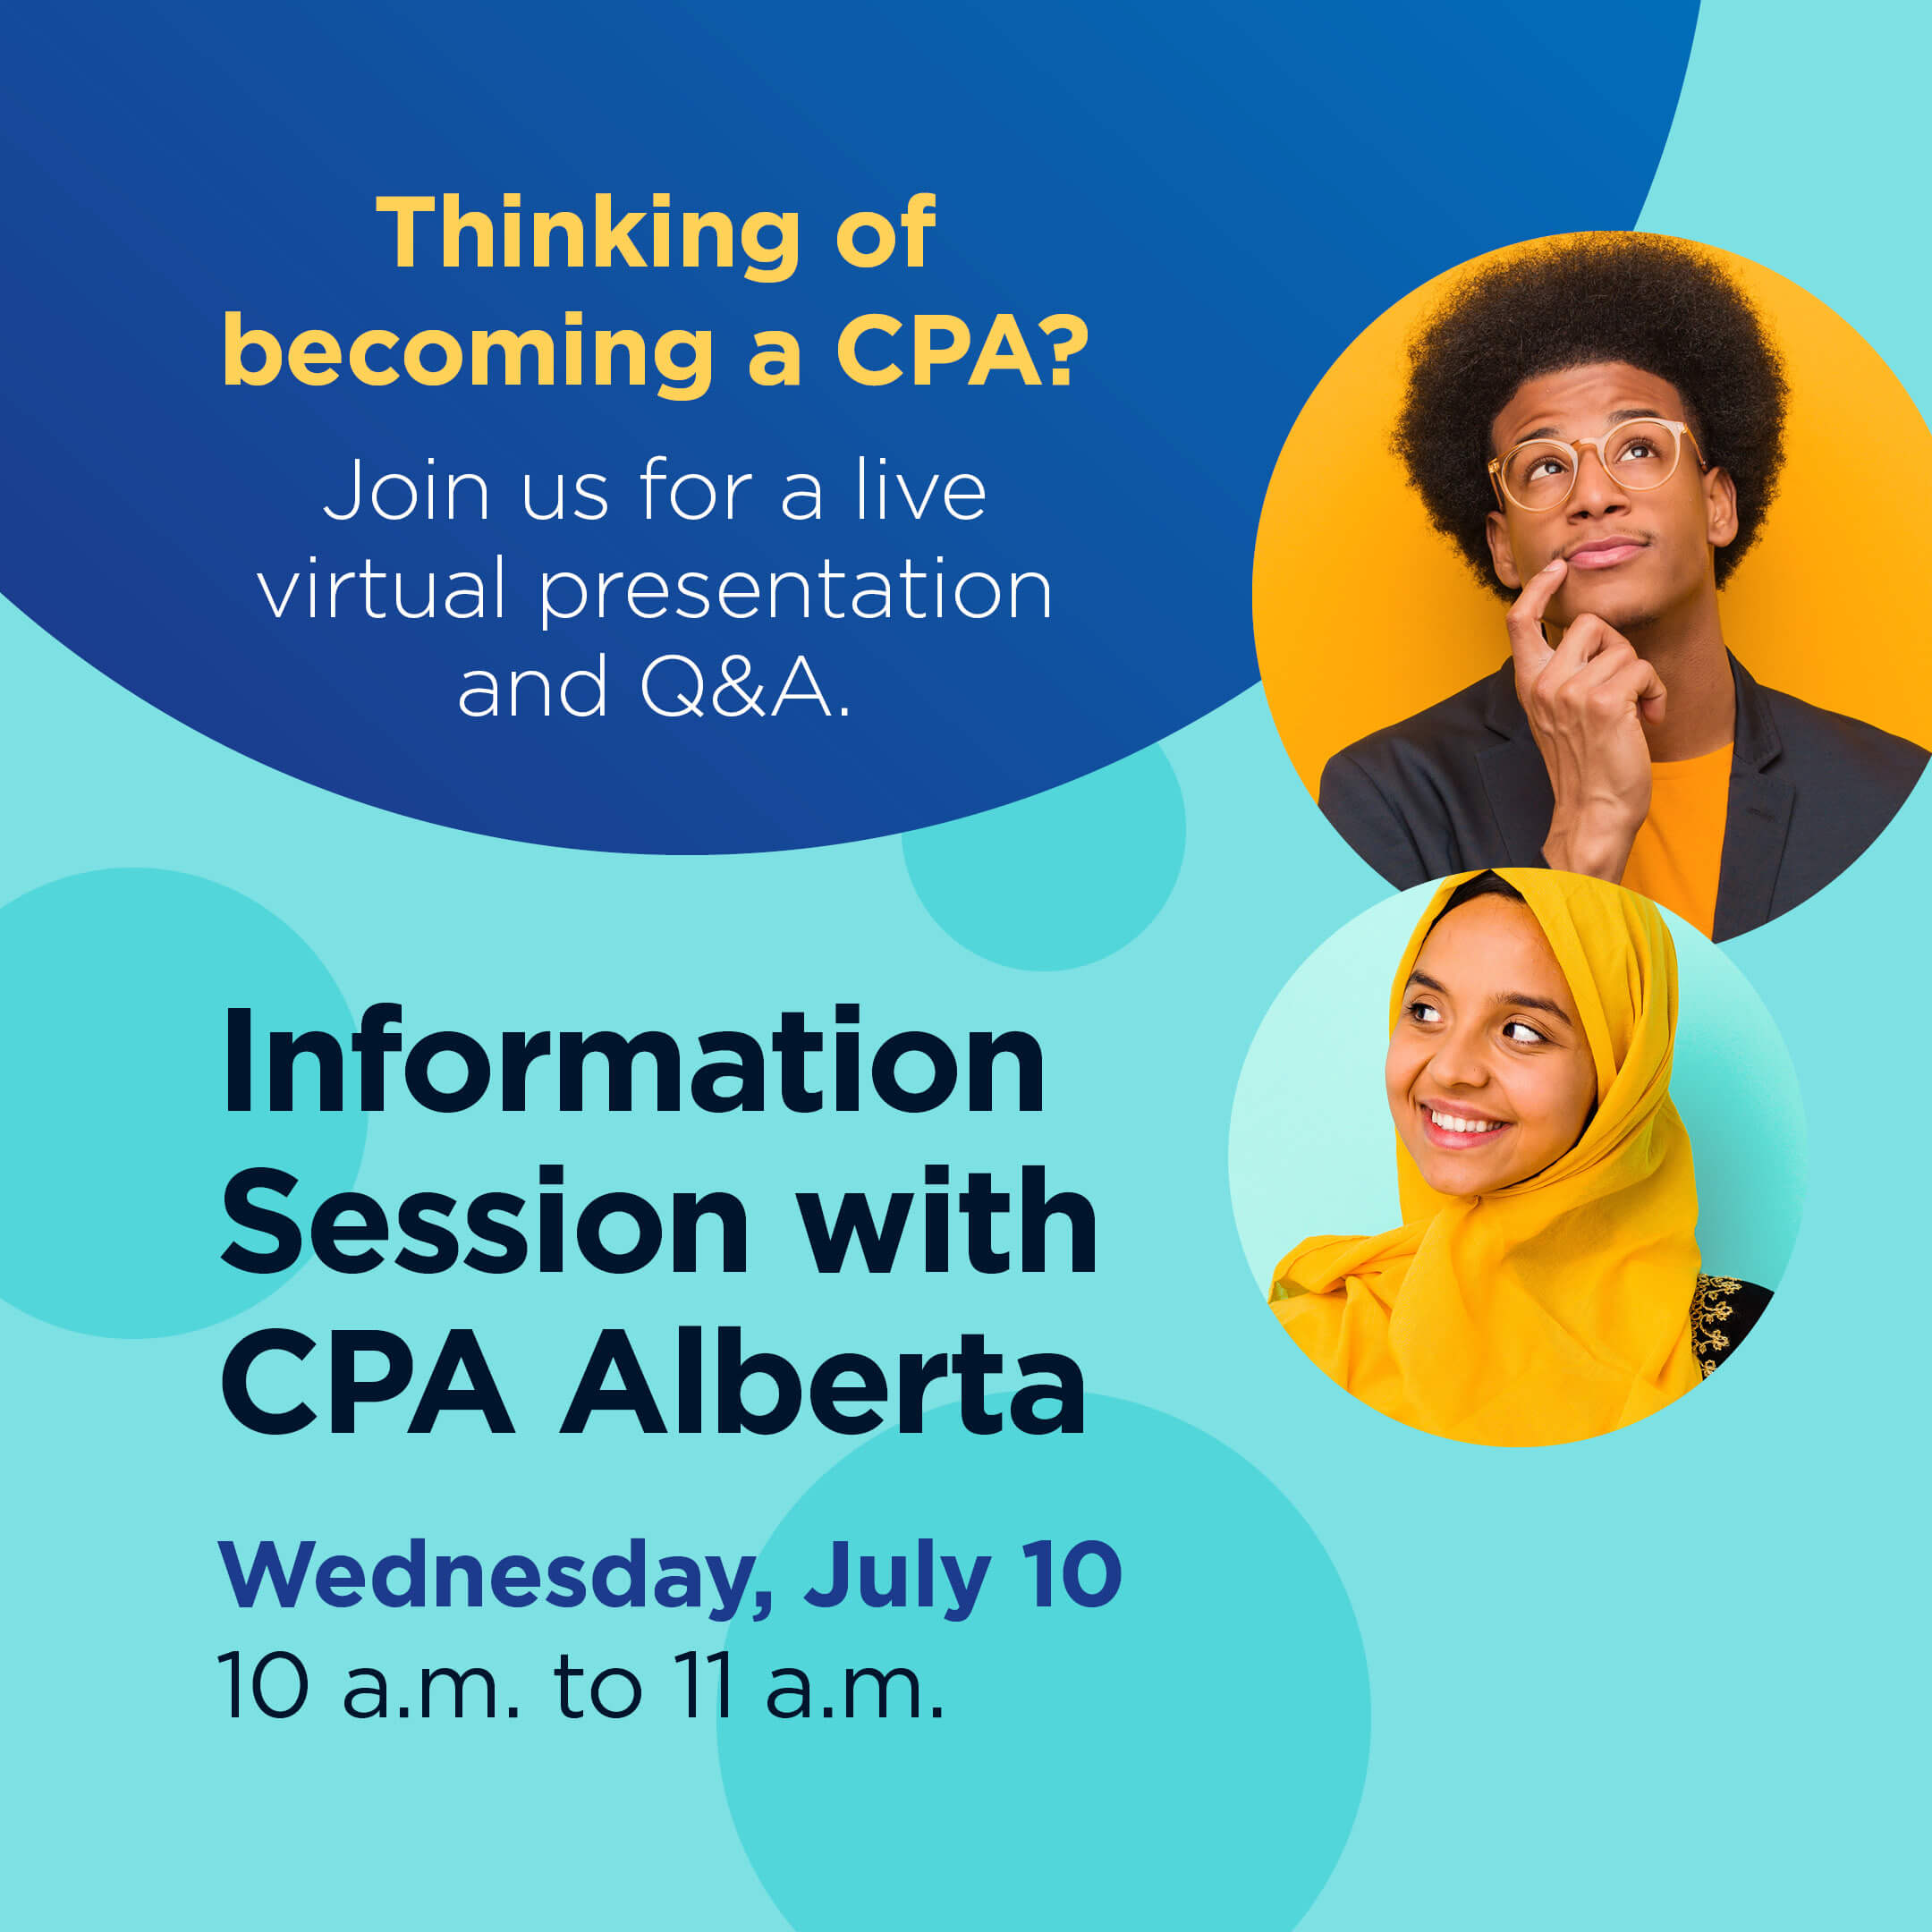 CPA Alberta become a CPA information session